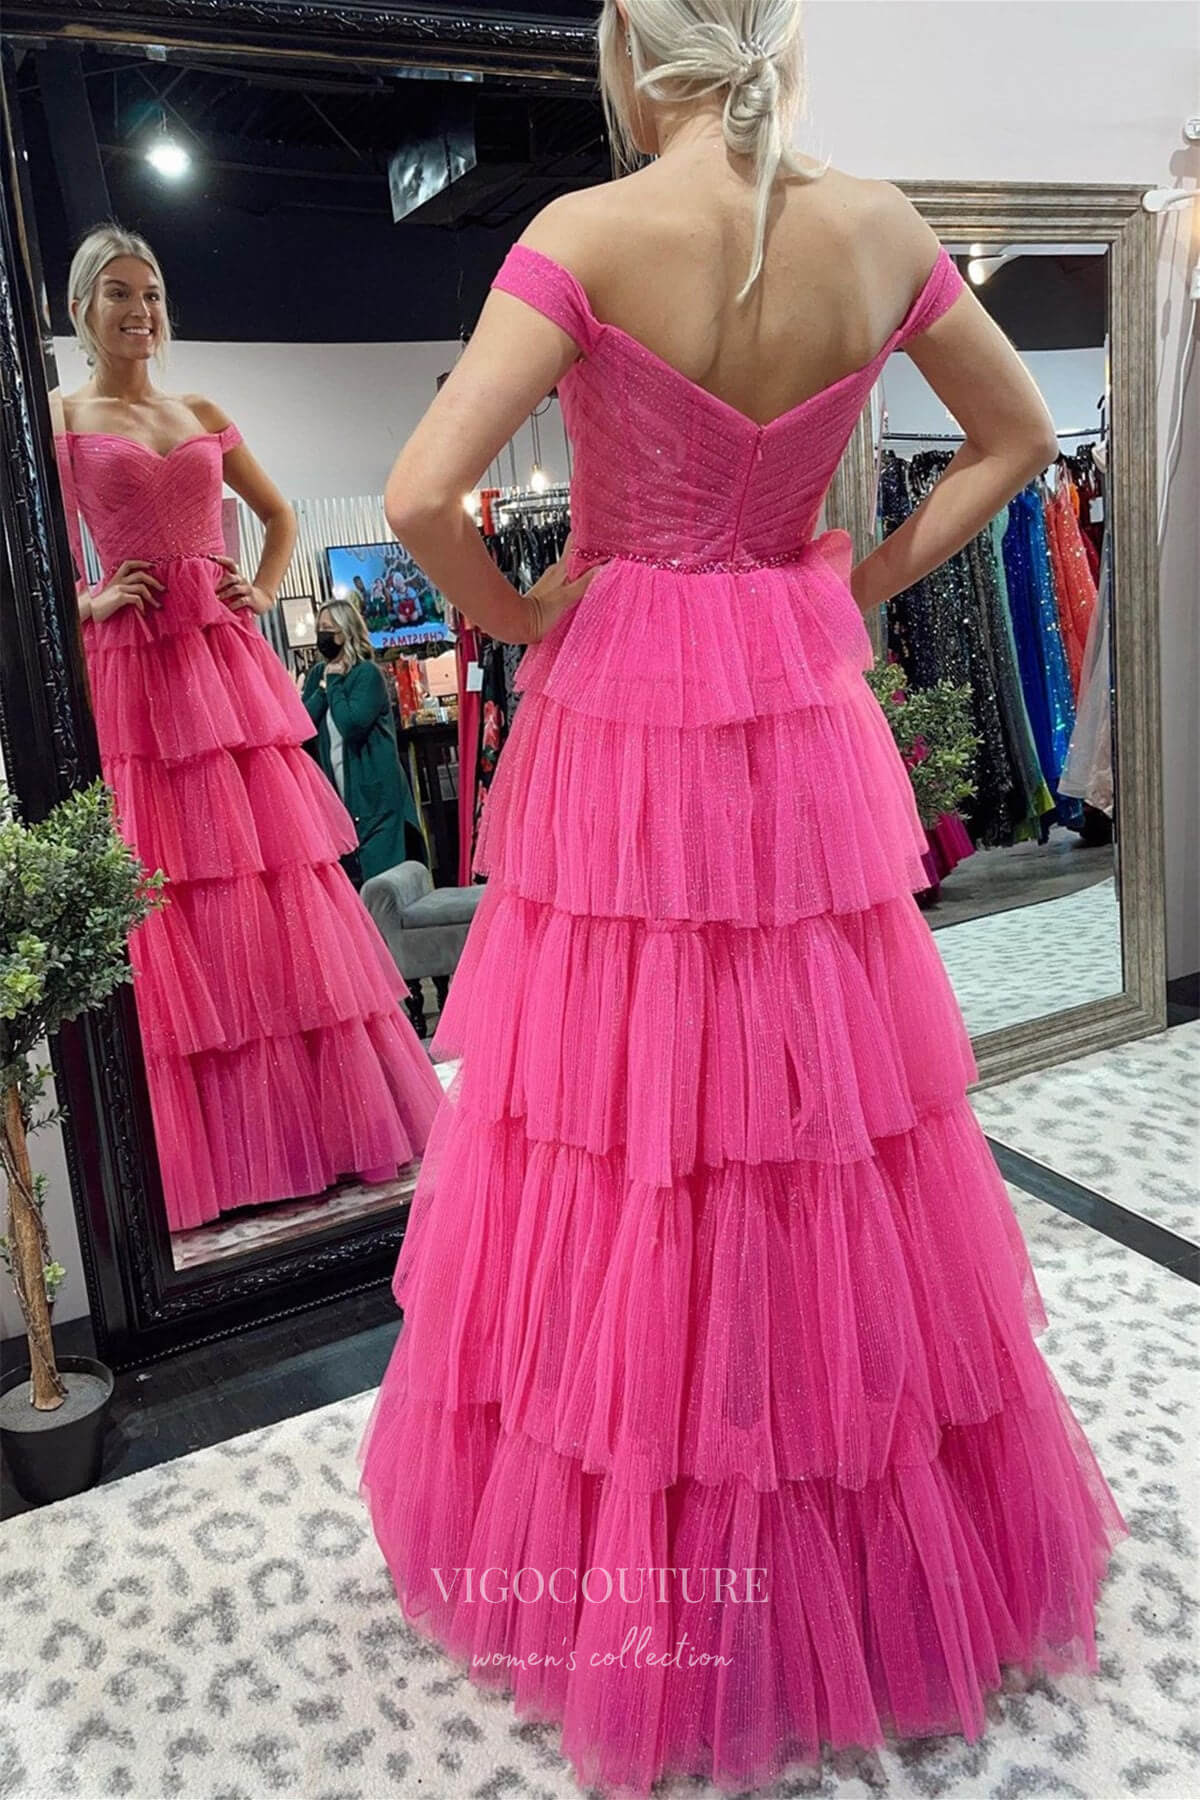 Sparkly Tulle Prom Dresses A-Line Off the Shoulder Formal Dresses 21539-Prom Dresses-vigocouture-Hot Pink-US2-vigocouture